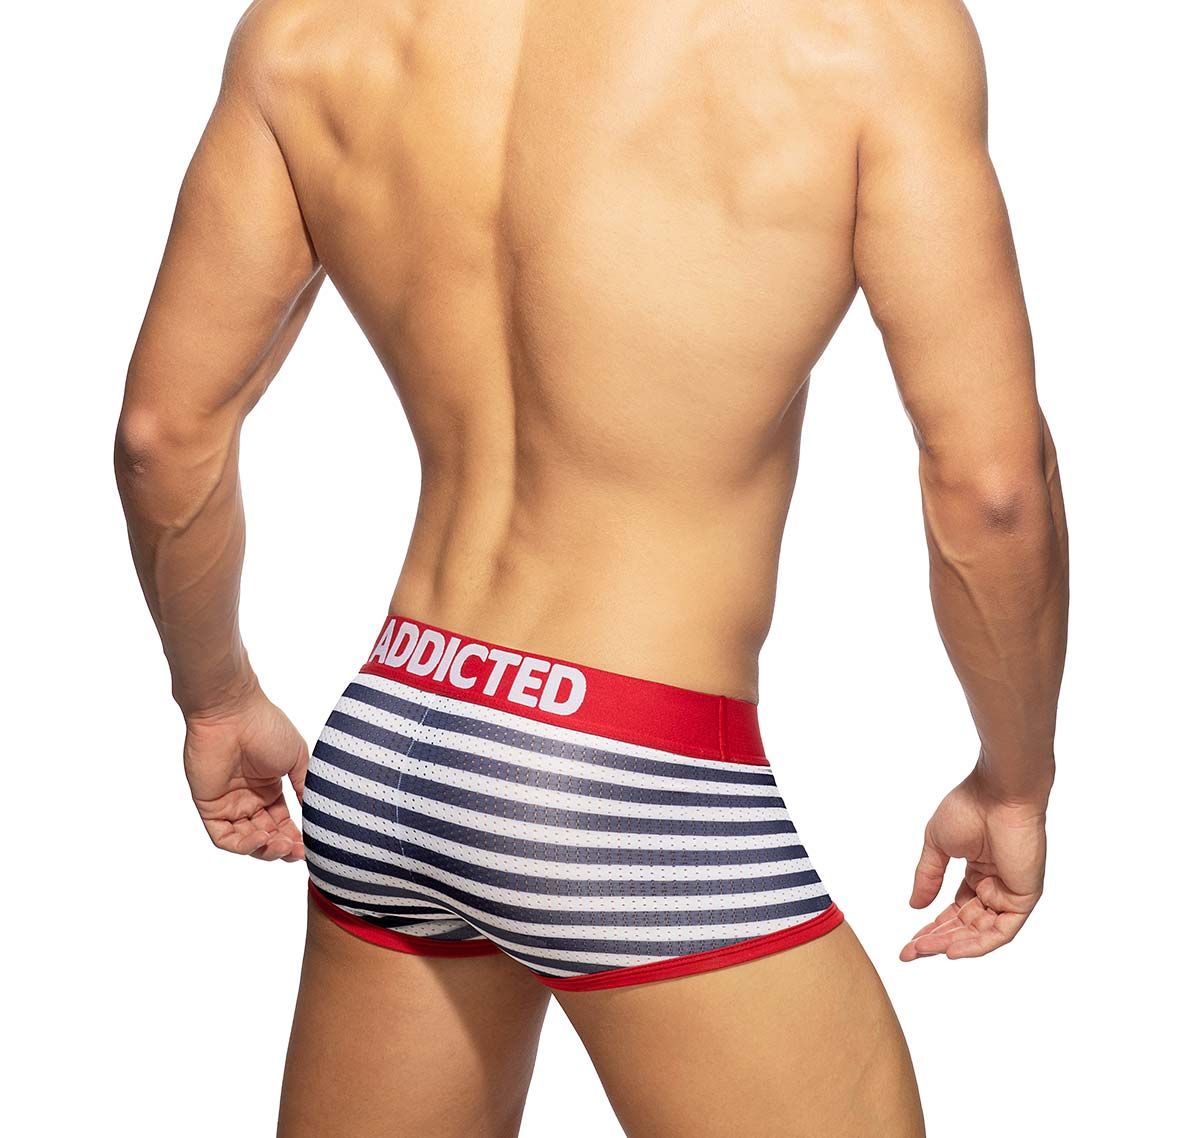 Addicted Pack of 3 Boxers SAILOR TRUNK PUSH UP AD965P, 3 colors